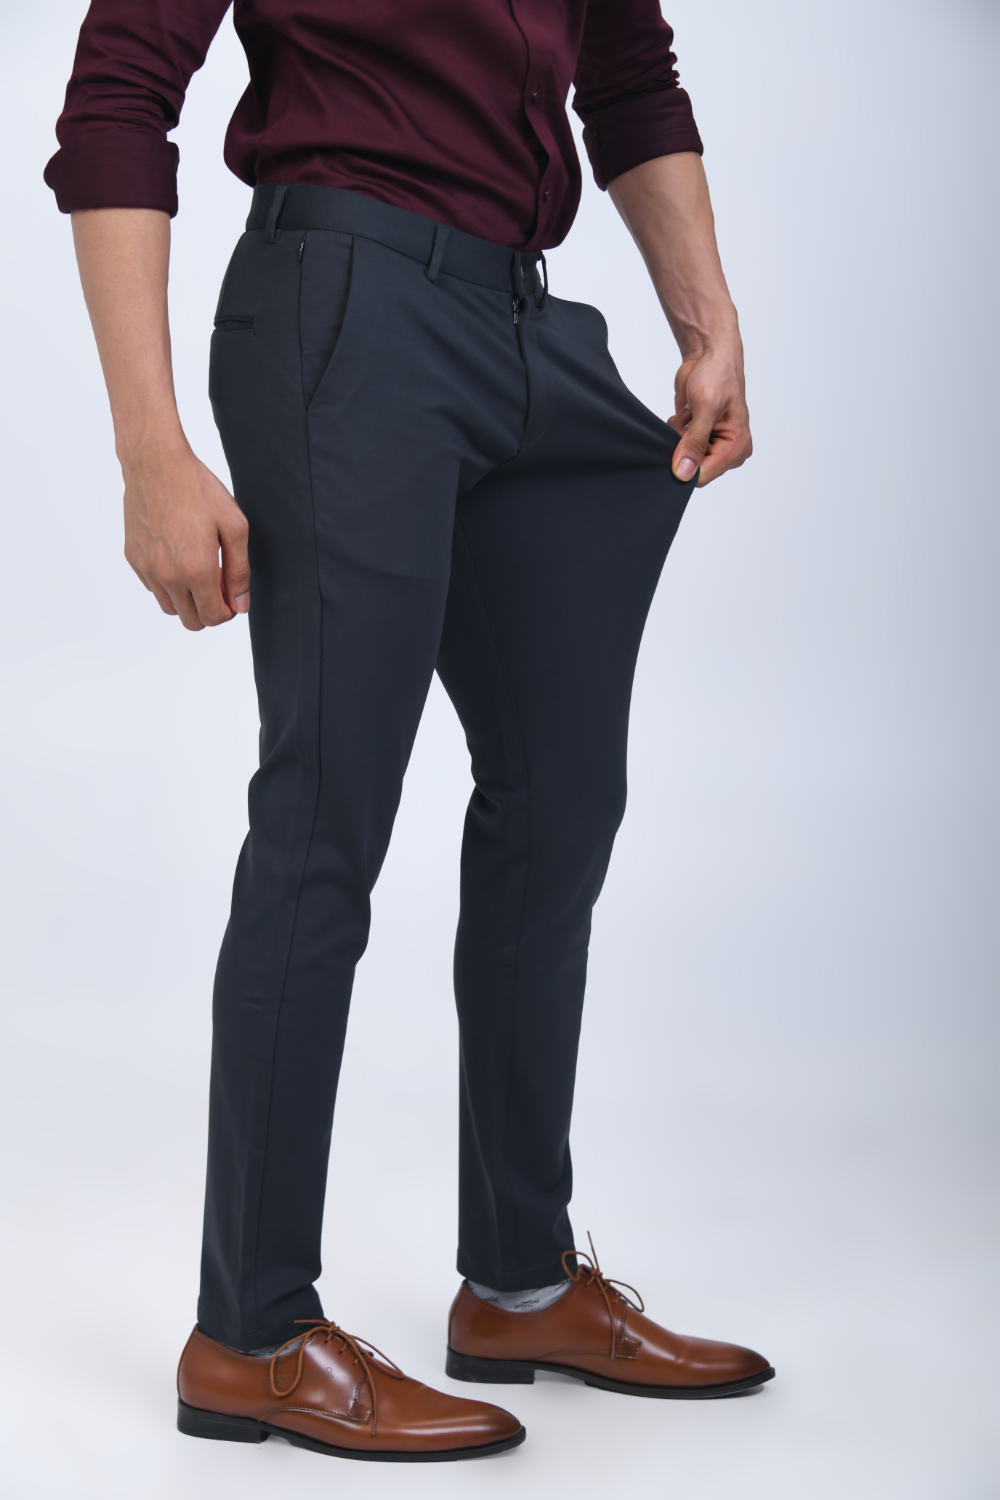 Flousers 2.0 | Stretchable Trousers For Men | Grey Tailored Fit ...